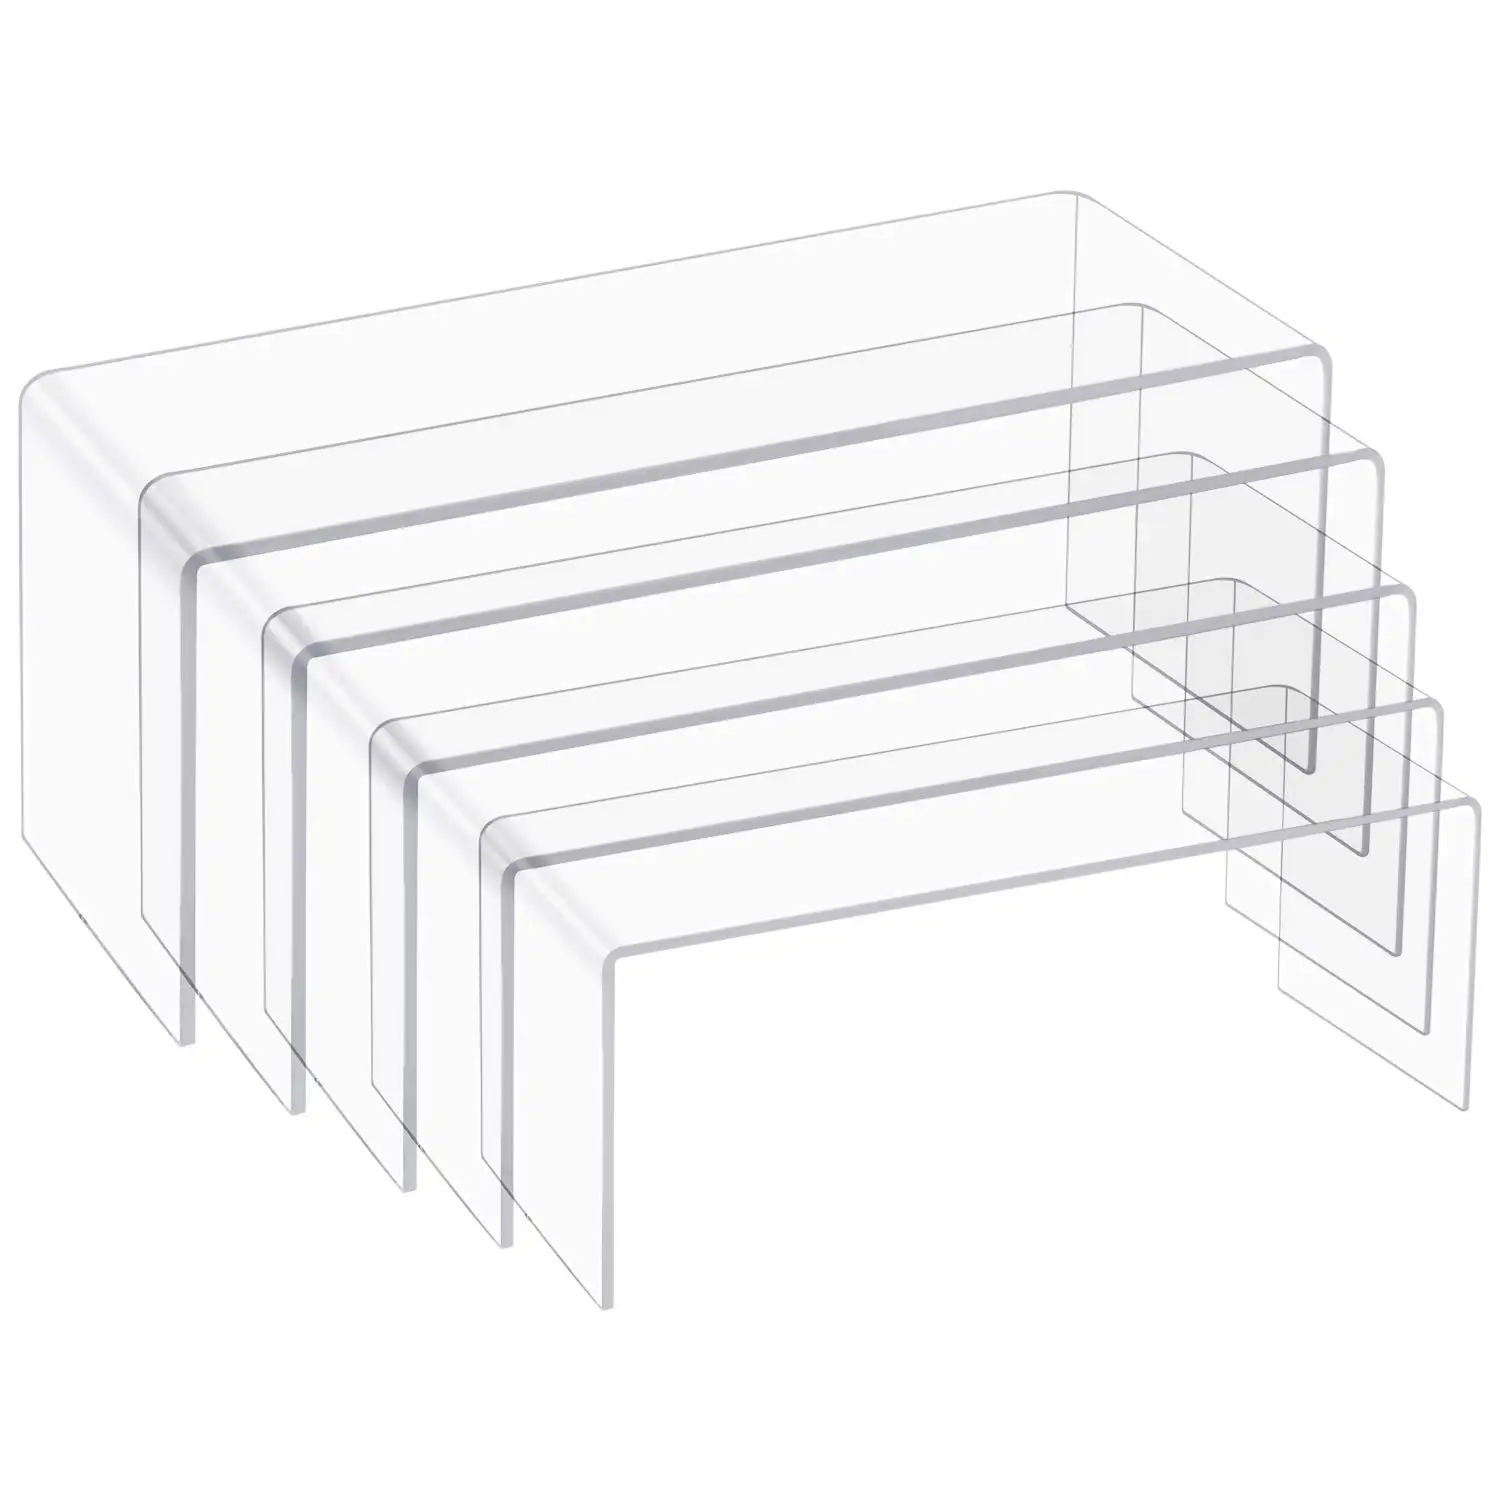 Goabroa Acrylic Display Risers Clear Rectangle Stands Shelf for Display 6pcs for sale online 